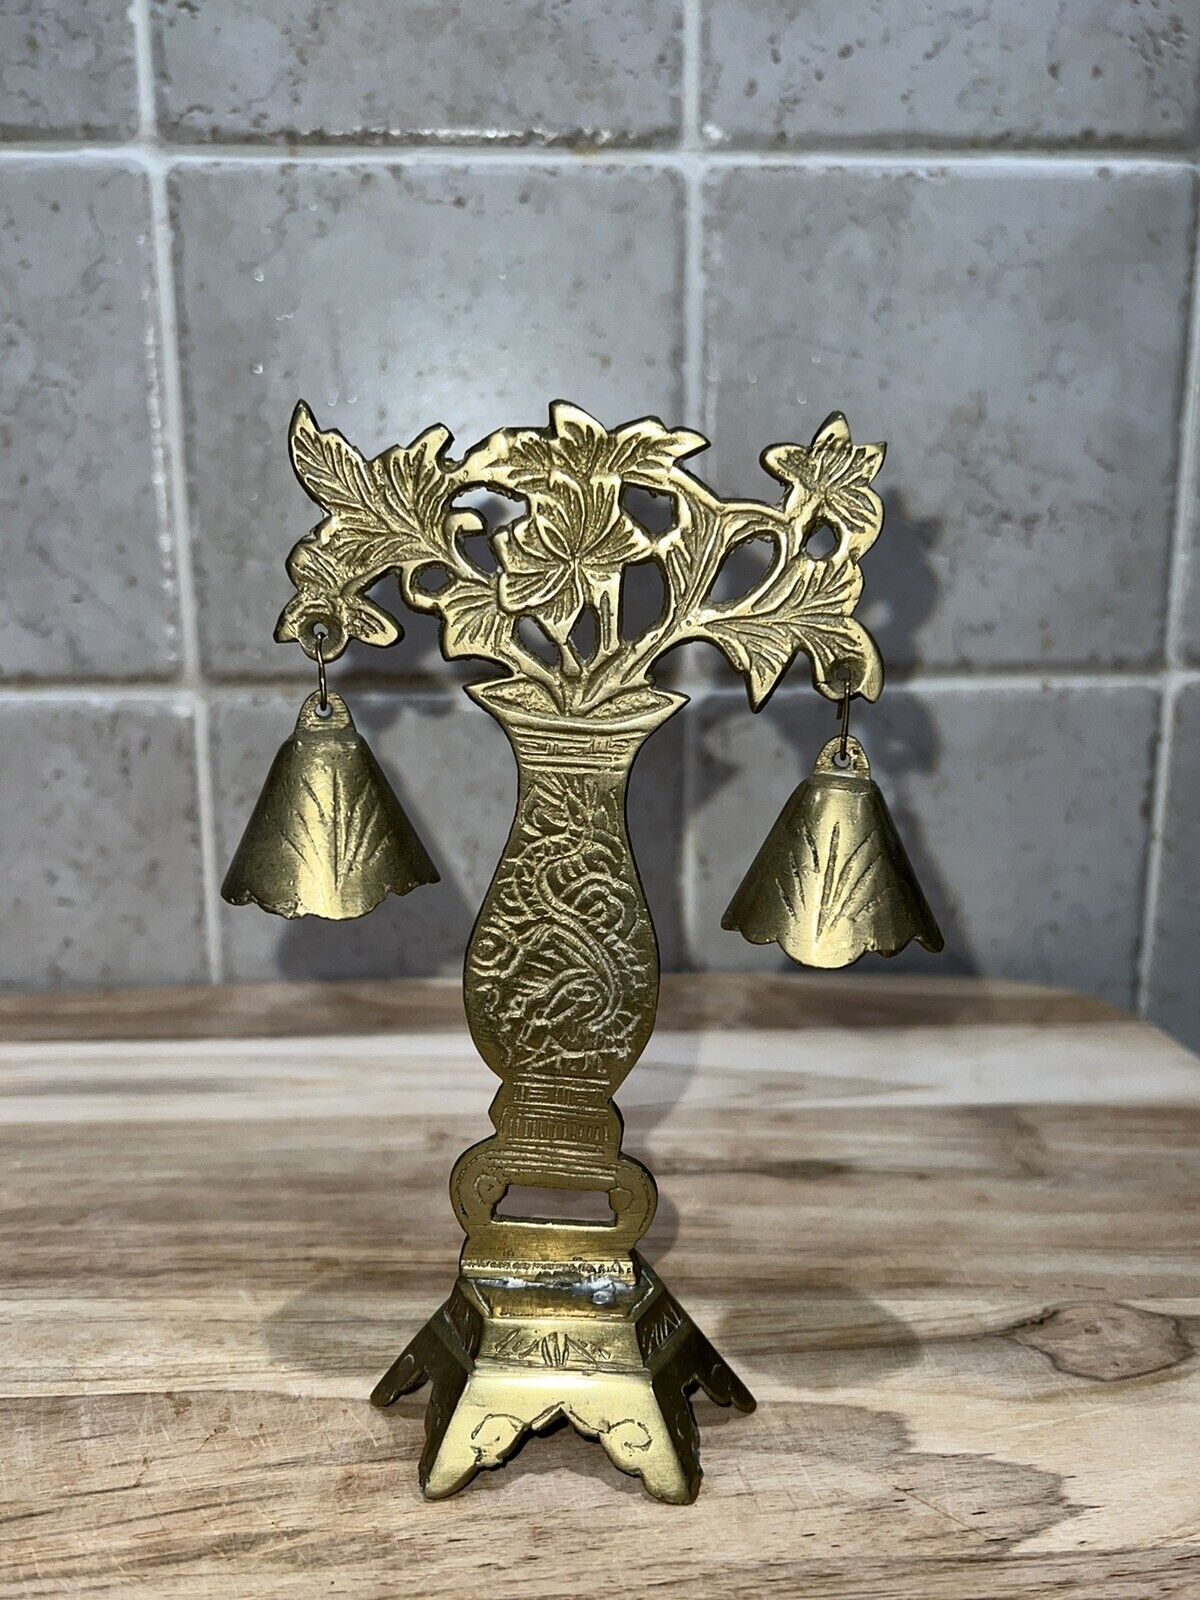 Vintage Solid Brass Bell Stand With Double Bells & Engraved Designs Chinese